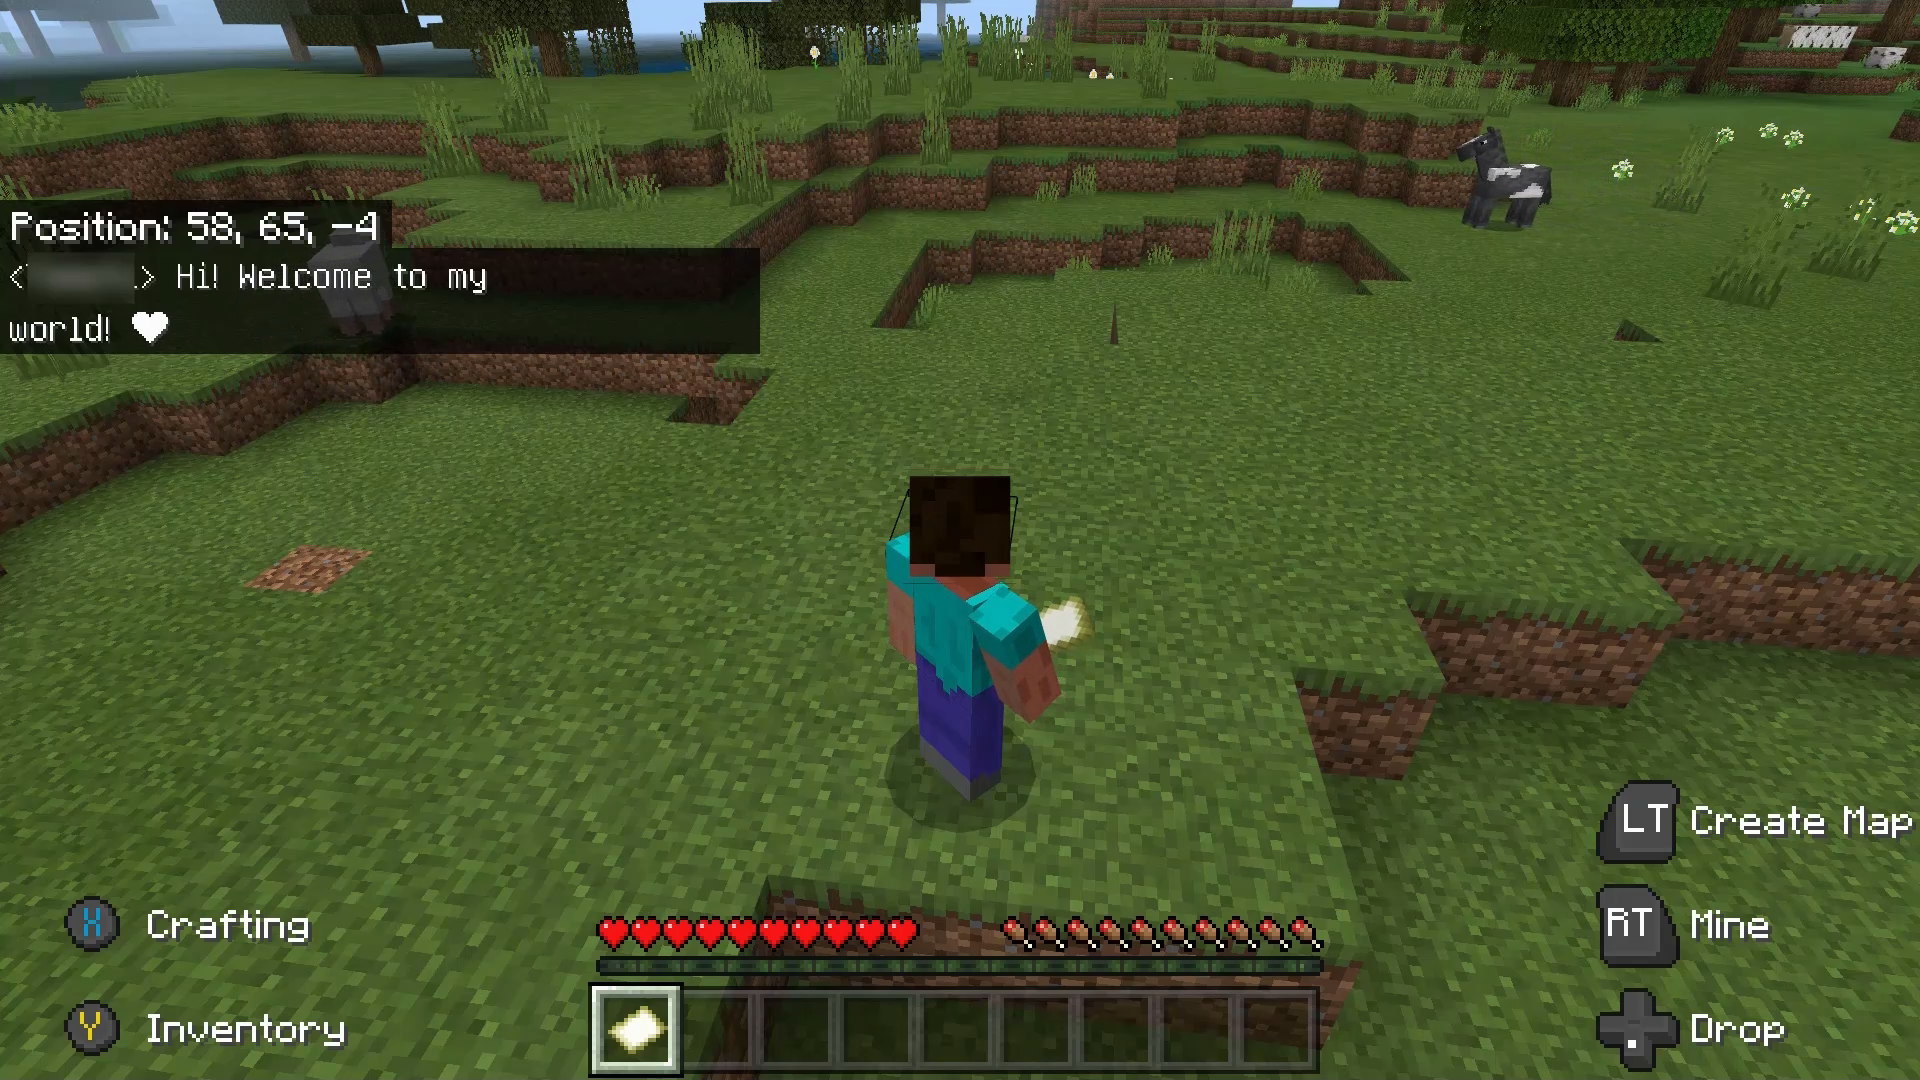 A screenshot from Minecraft Bedrock Edition that shows the character "Steve" in the world with a multiplayer text chat appearing on the left of the screen that reads, "Hi! Welcome to my world!"